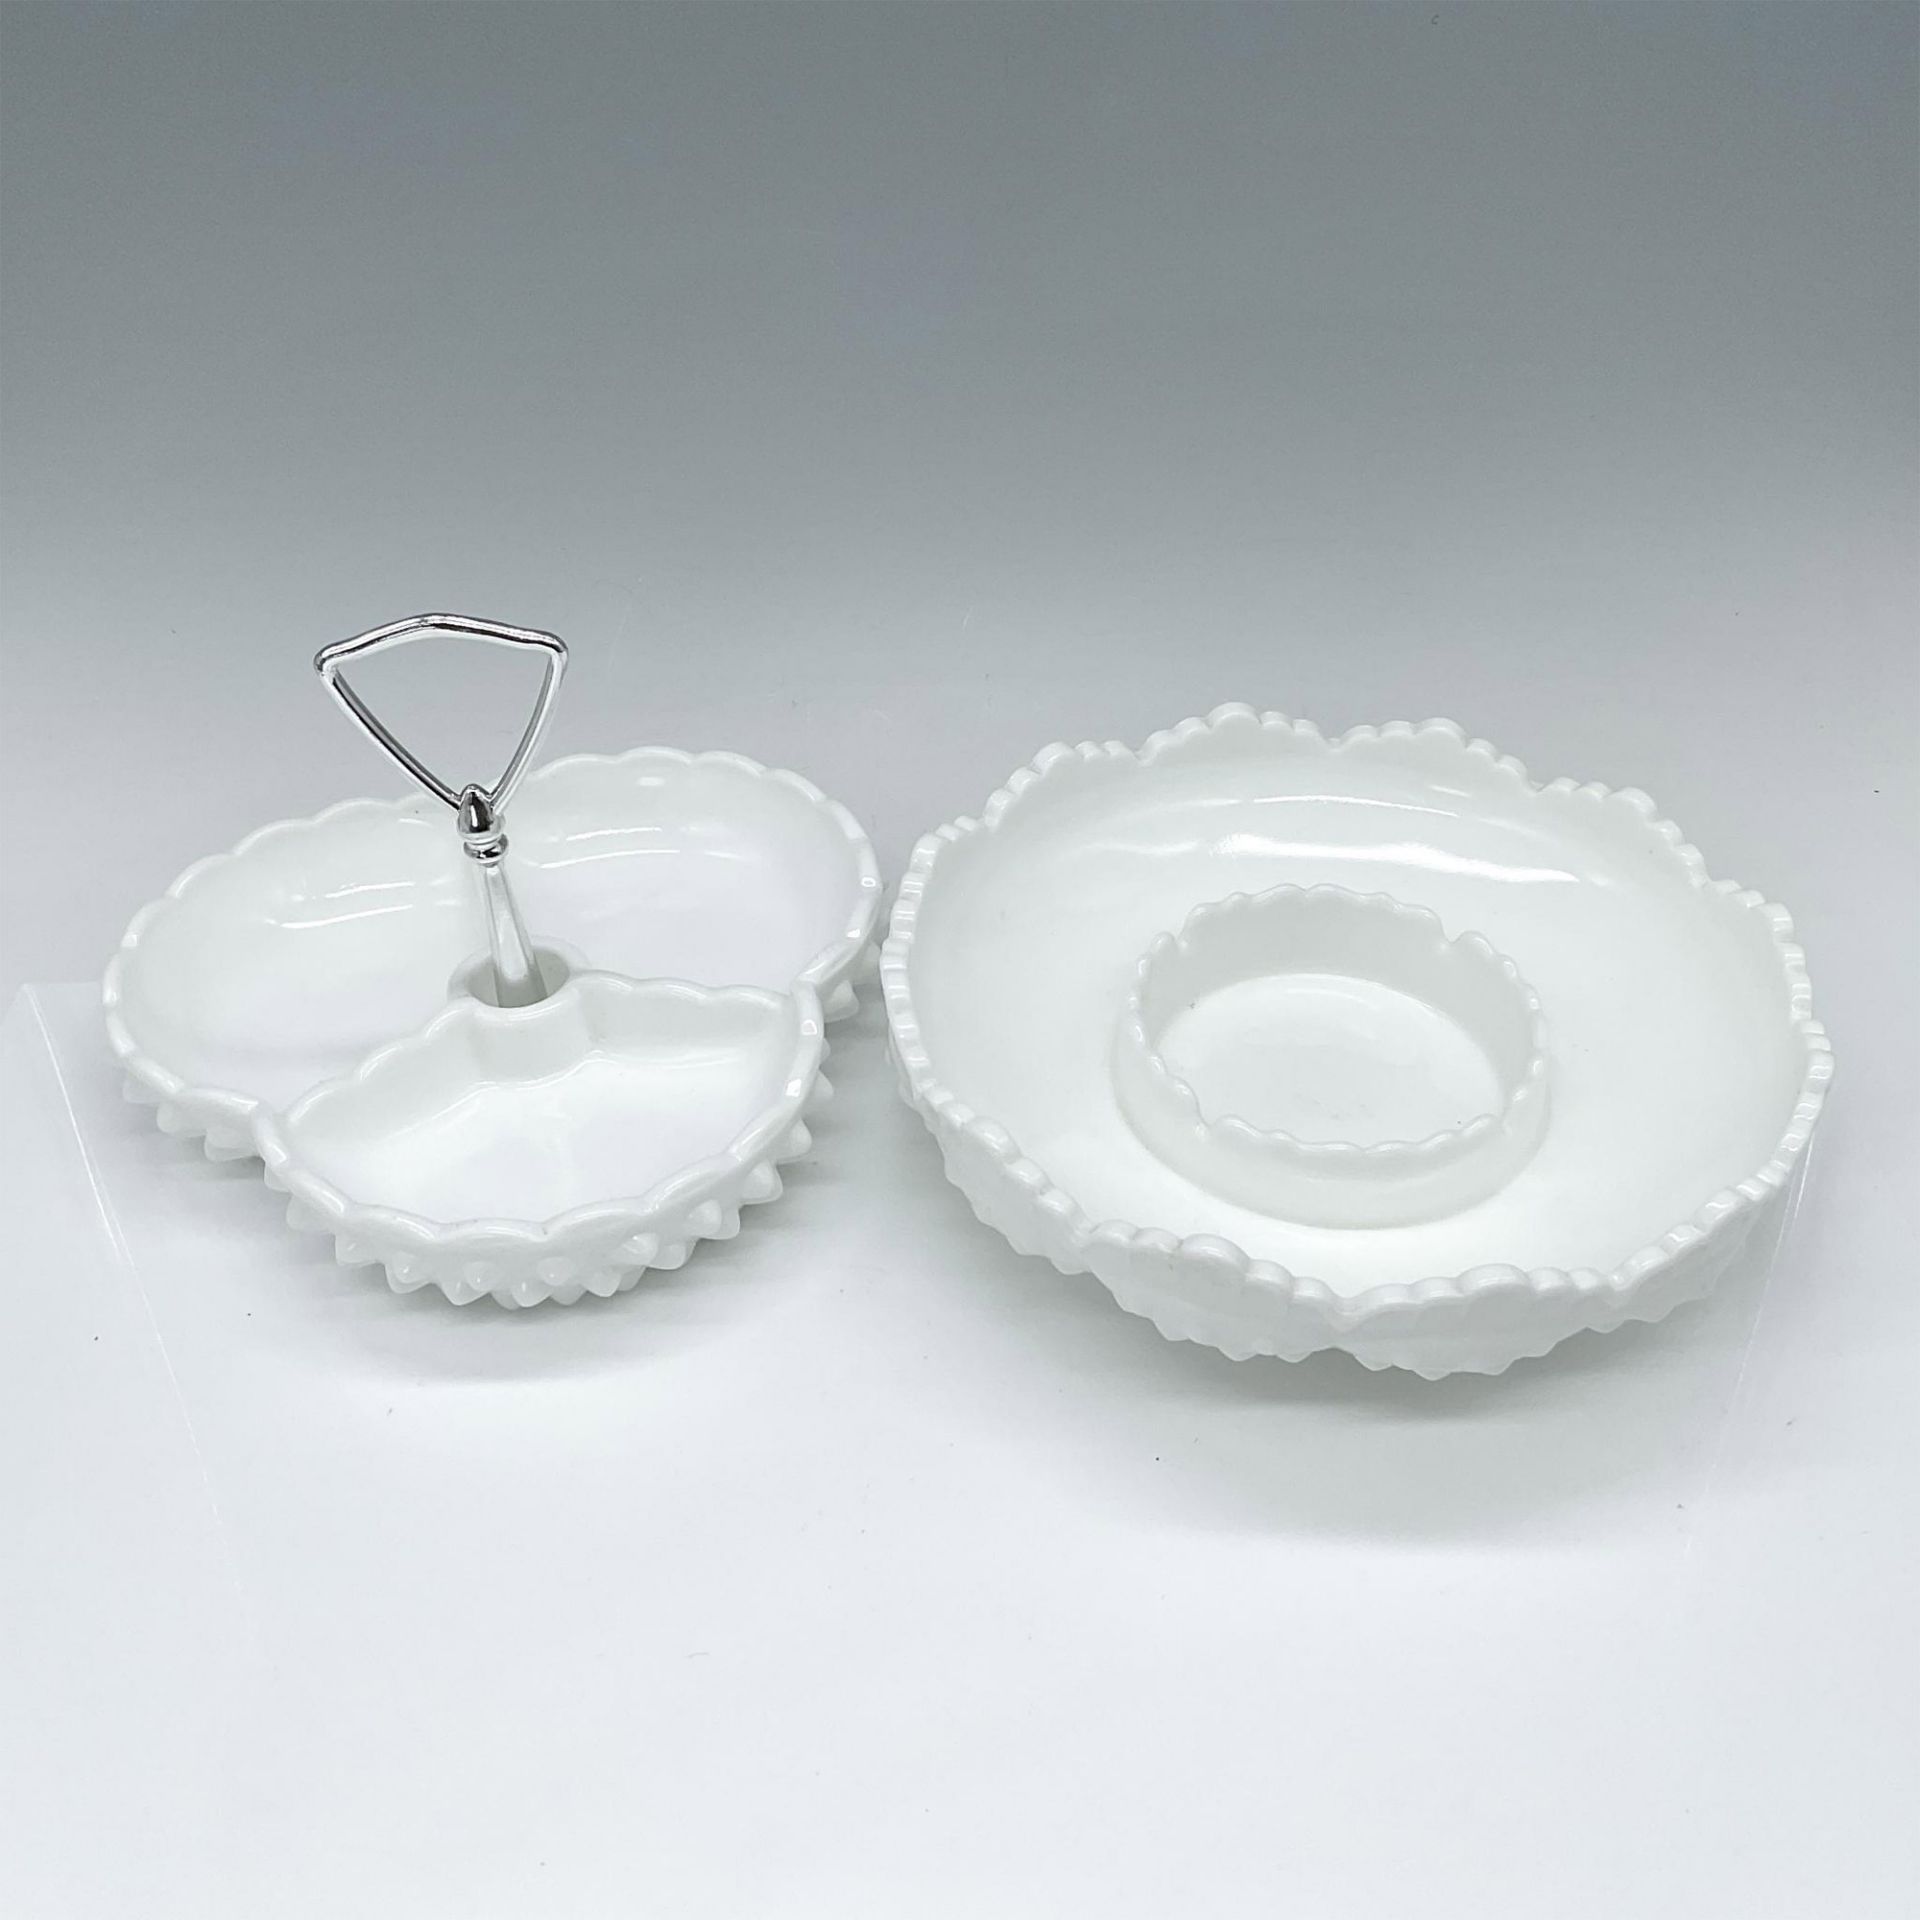 2pc Fenton Hobnail Milk Glass Serving Dishes - Image 3 of 4